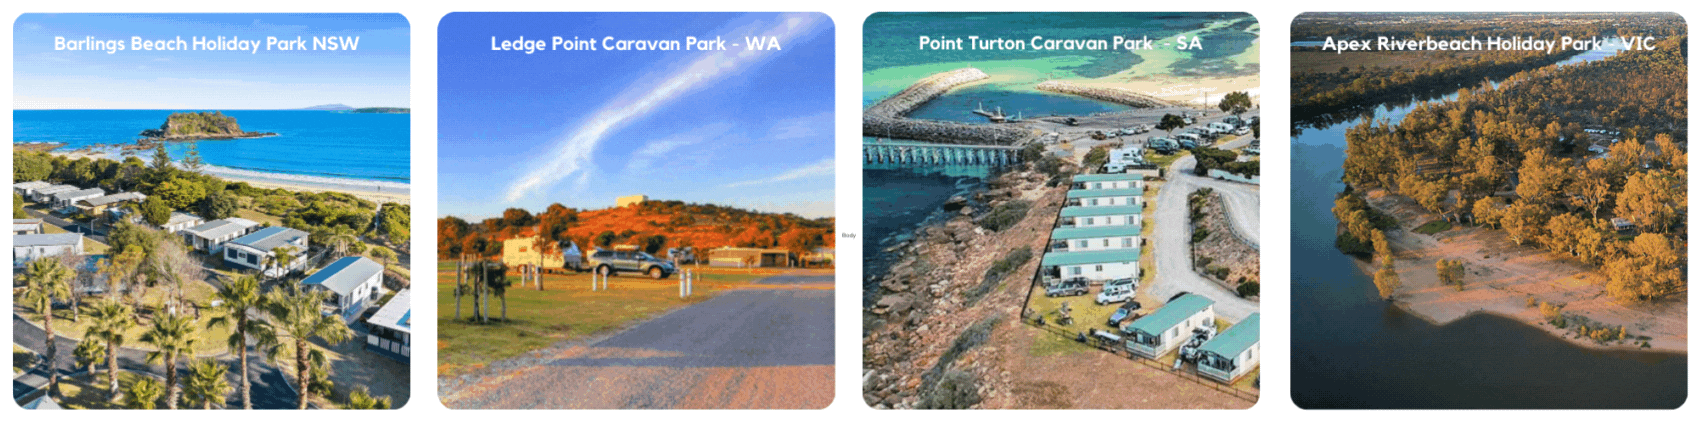 Caravan parks that are a part of the Tawk Supporters Parks